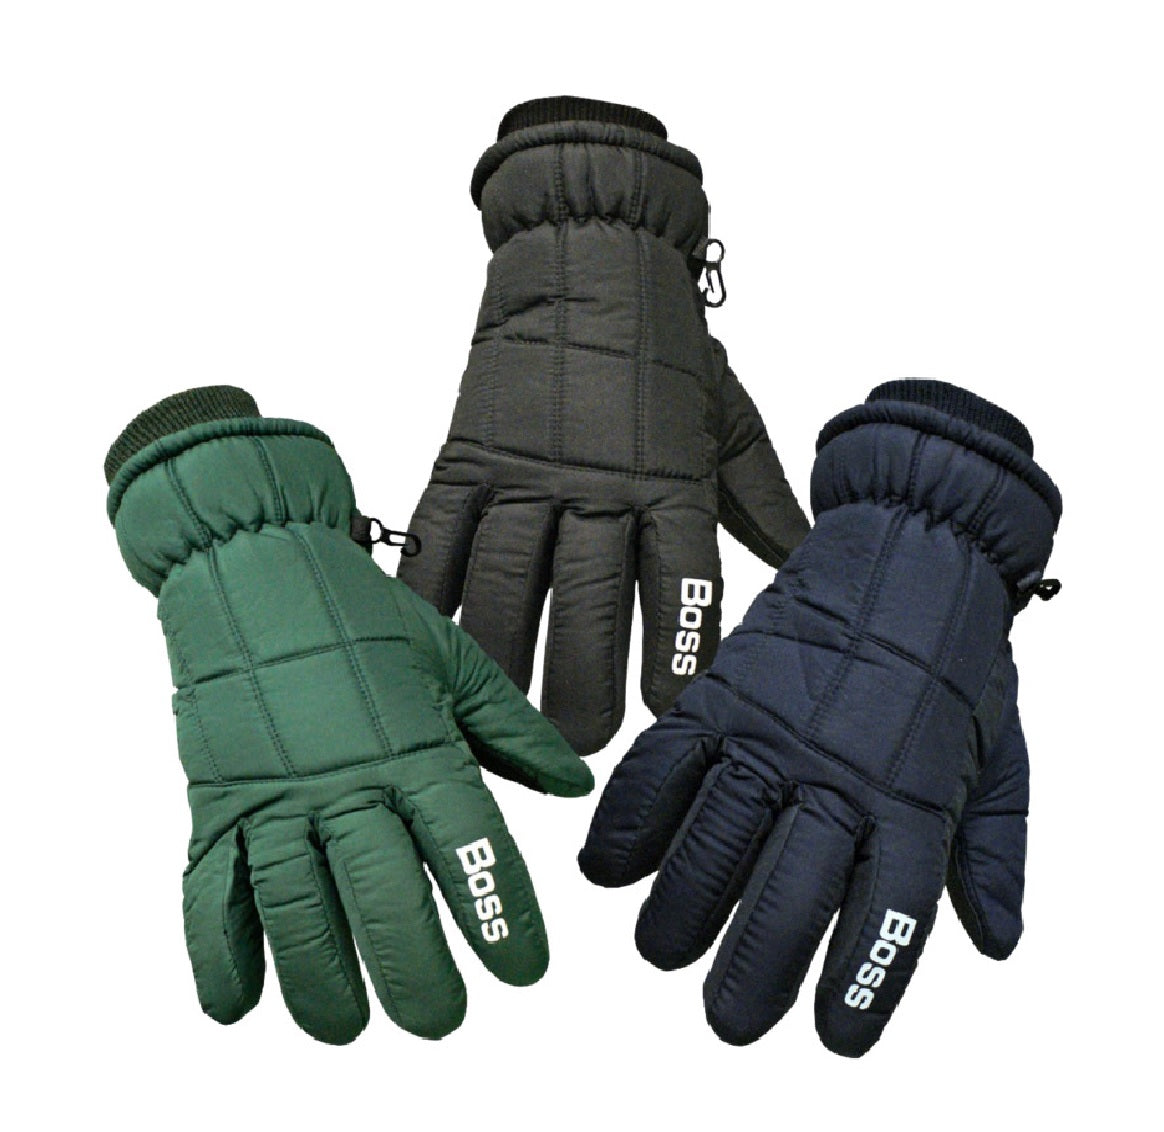 Boss 4232BE Insulated Skin Gloves, Black, X-Large